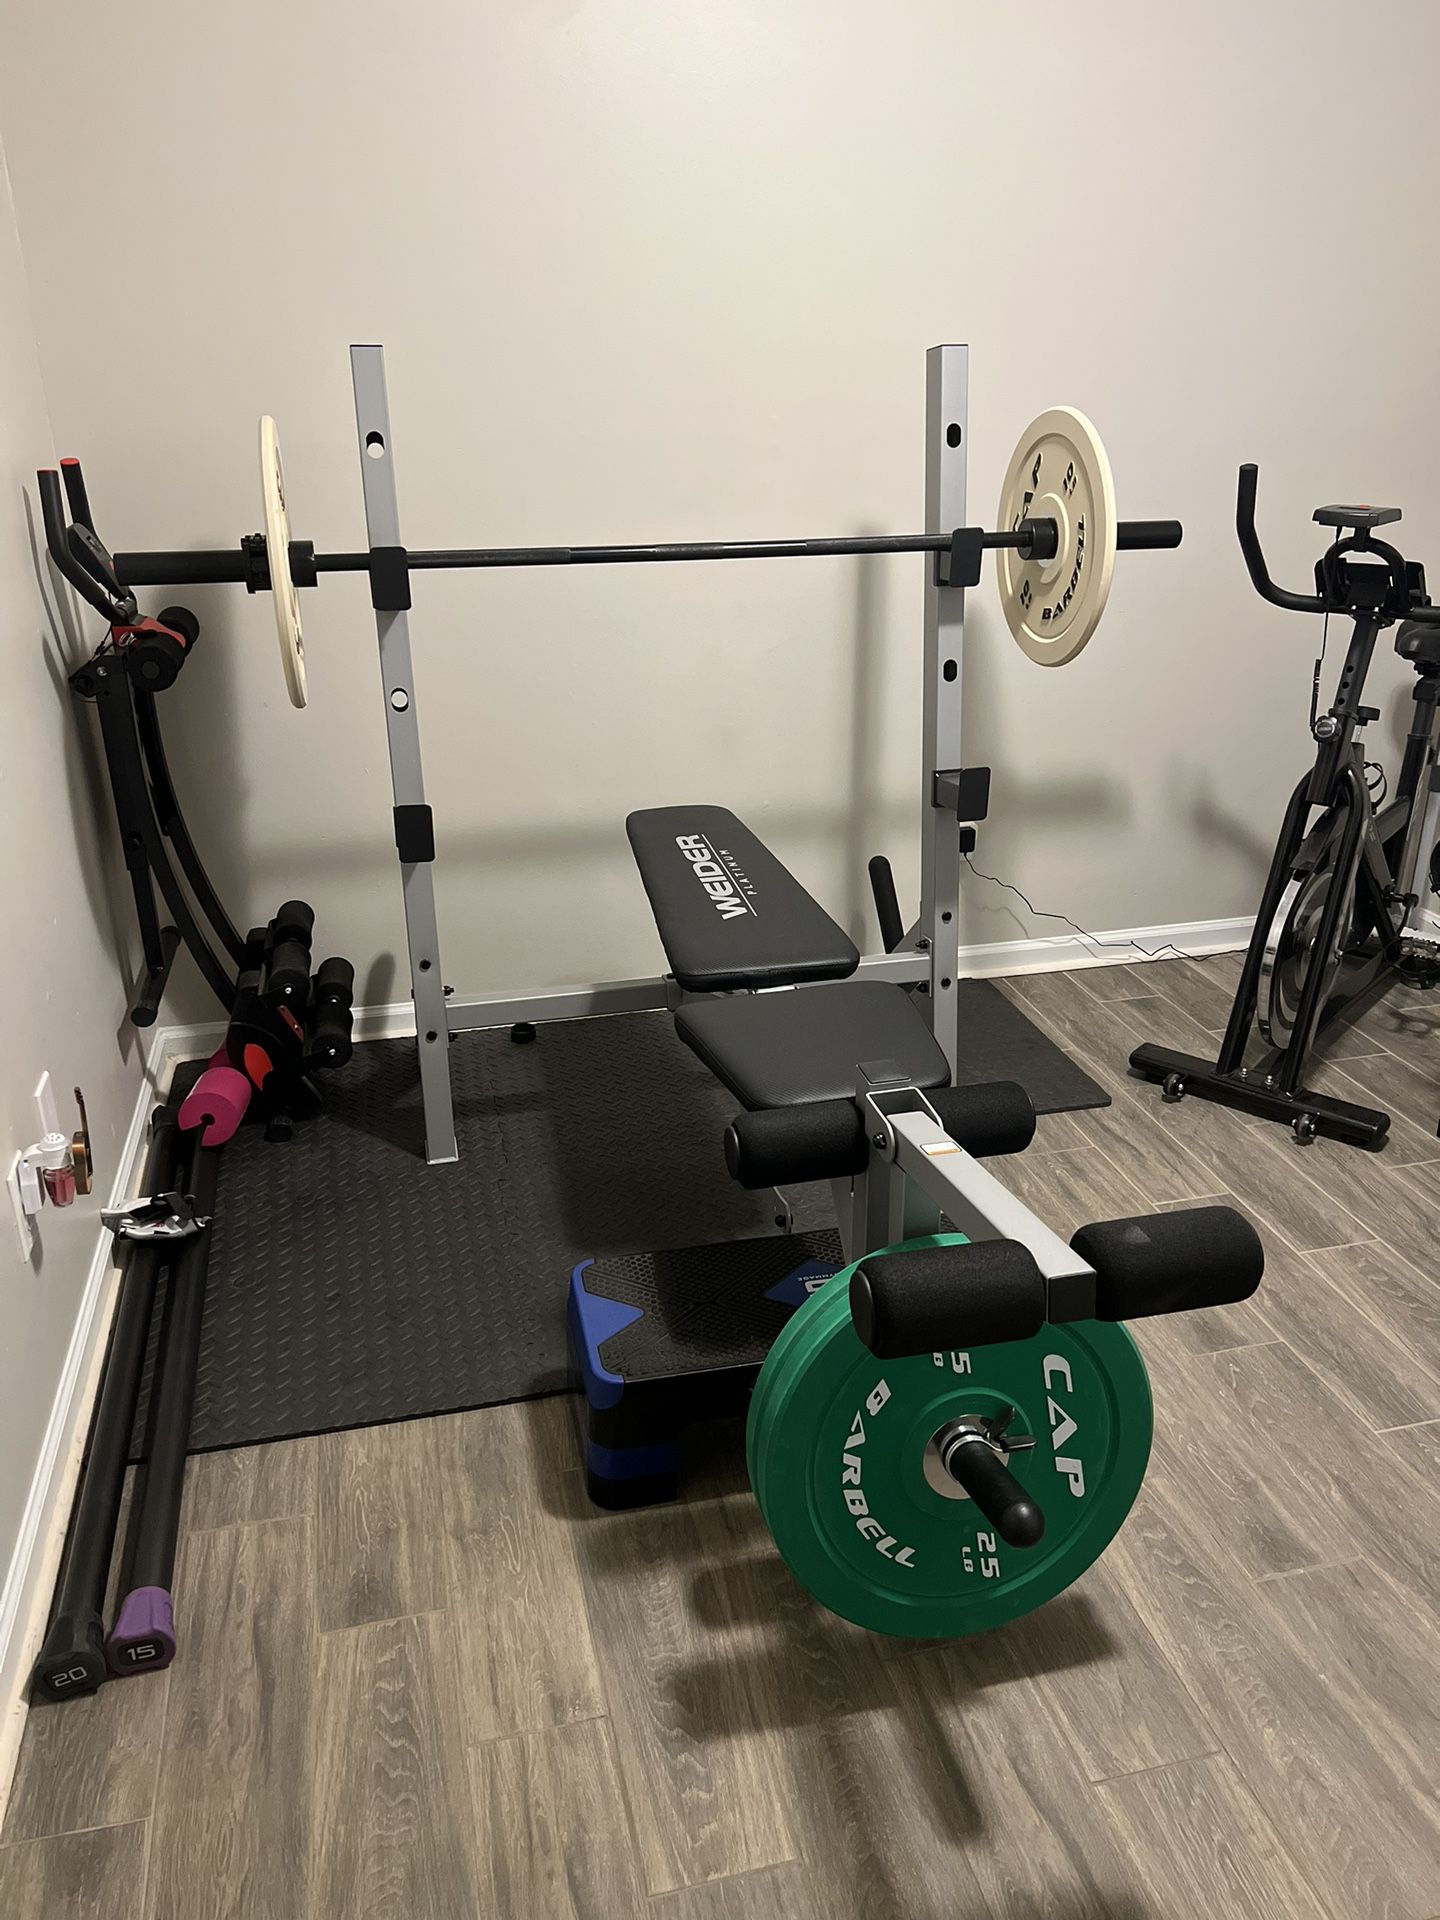 Weight bench, W/ 10 Lbs, 25Lb Weights